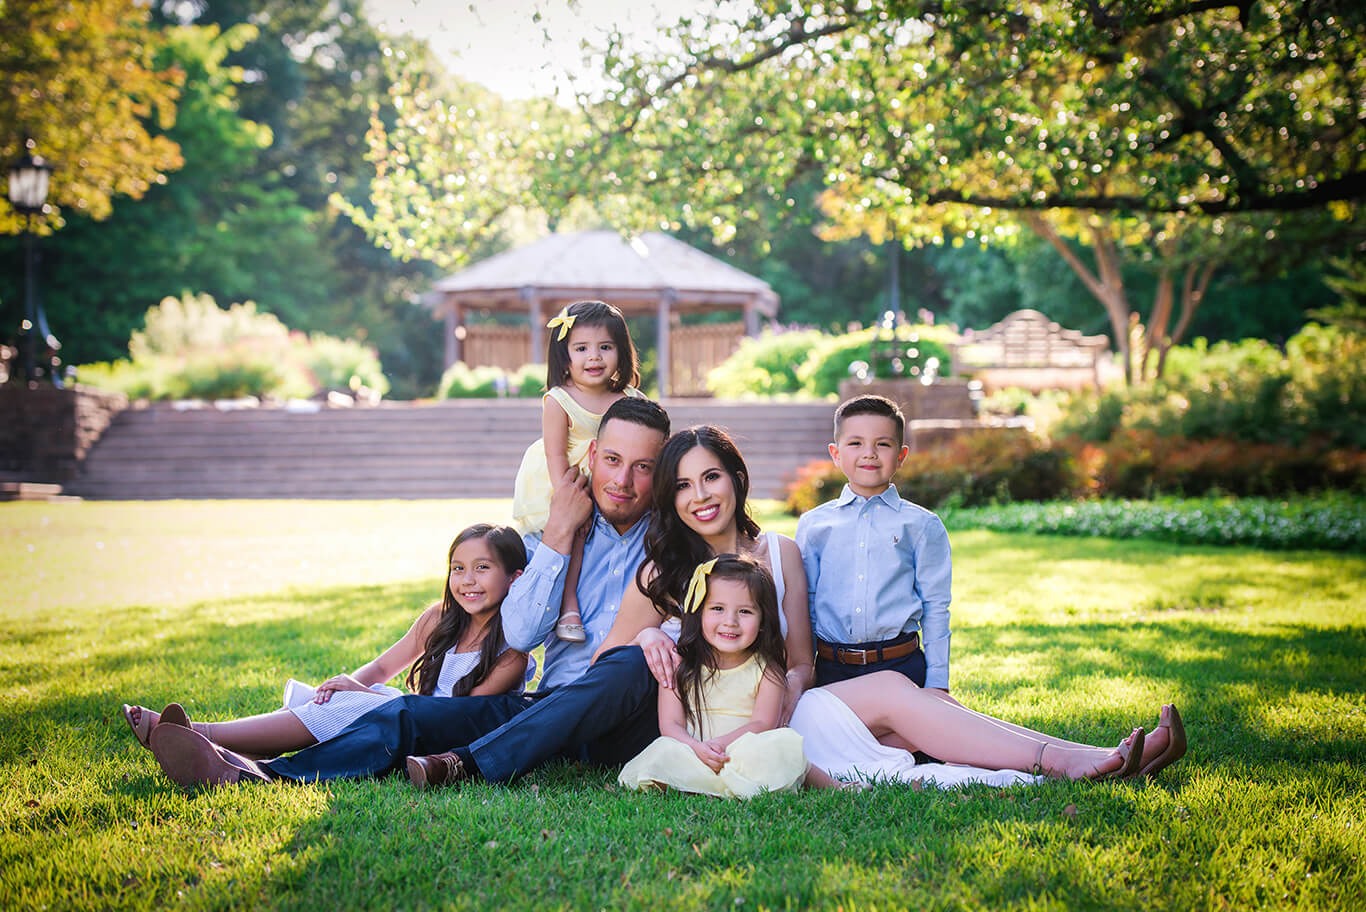 Professional family portrait shoot in the park